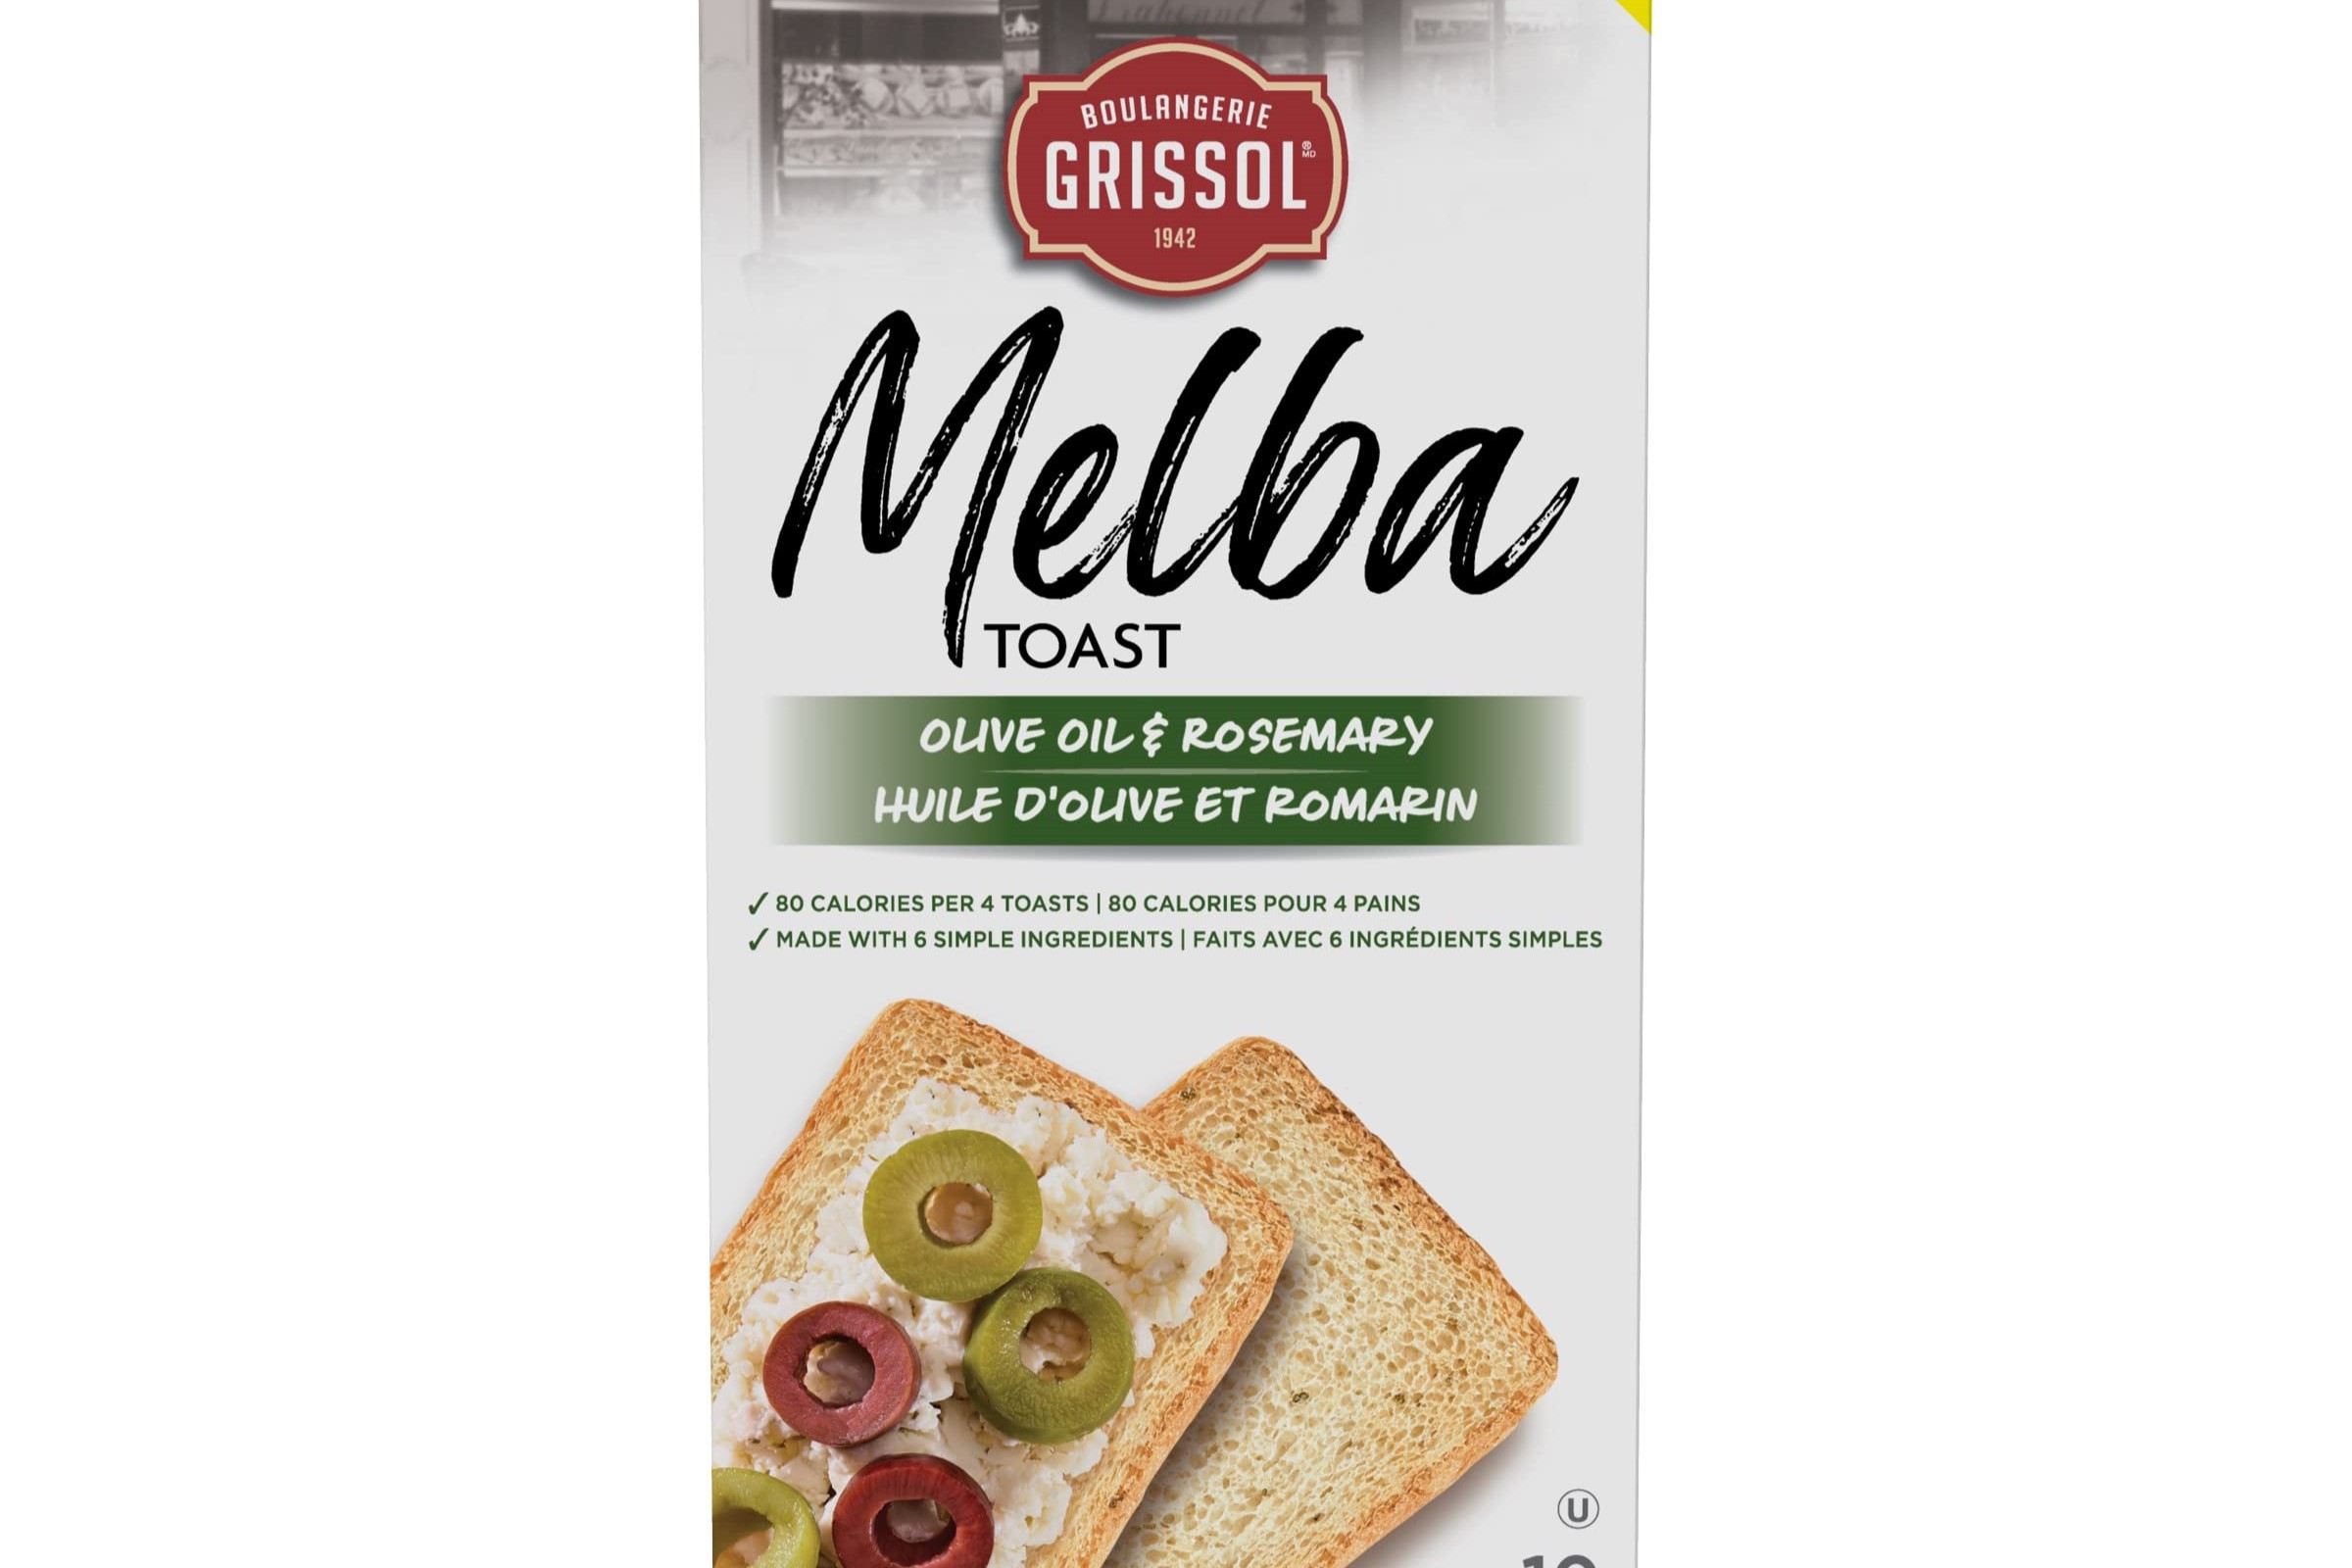 15-boulangerie-grissol-melba-toast-olive-oil-and-rosemary-nutrition-facts